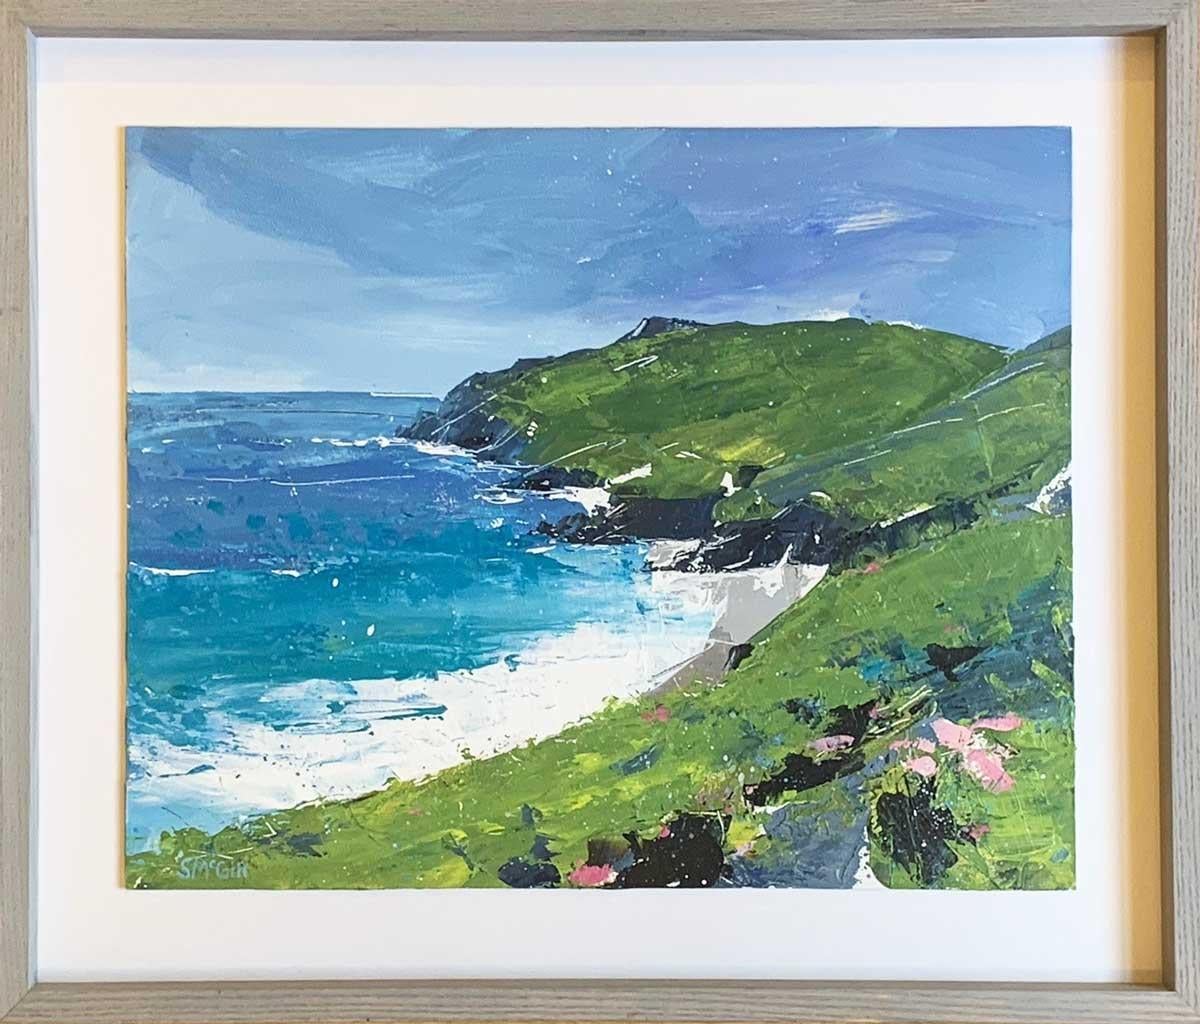 Porthchapel - Contemporary Rural Landscape: Framed Acrylic Painting - Blue Landscape Painting by Sian McGill